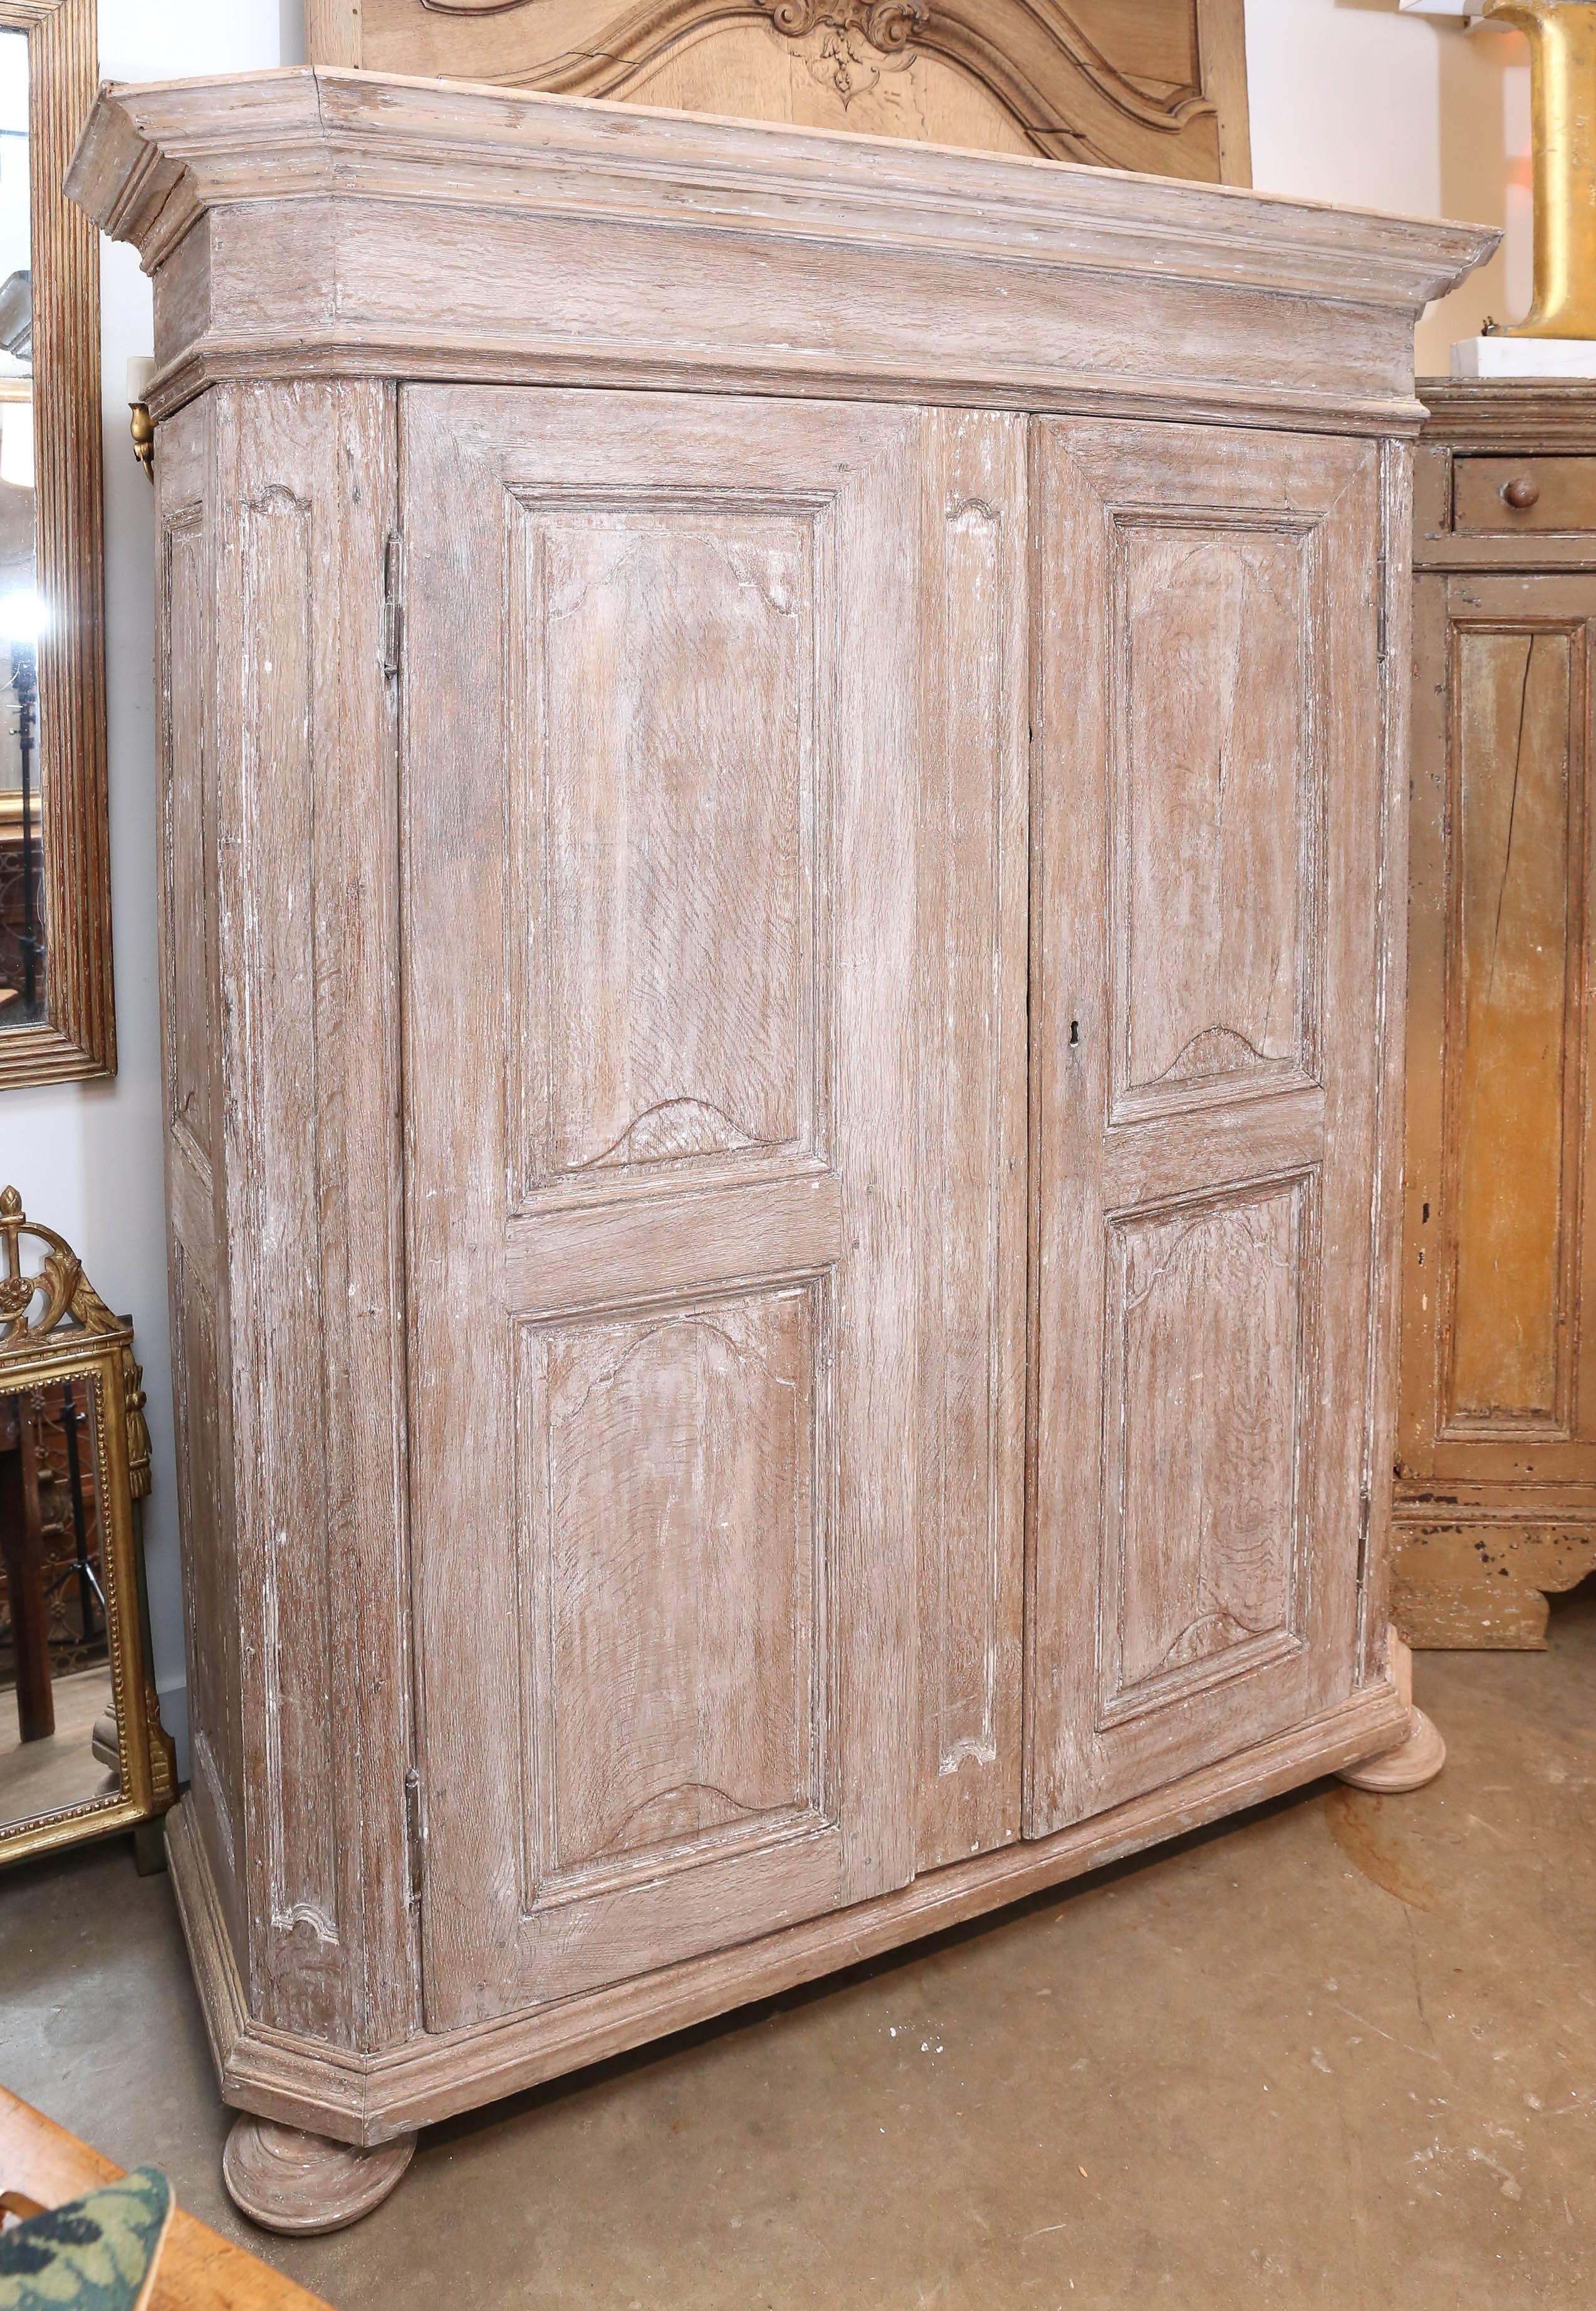 19th Century Northern European armoire with original scraped paint. Beautiful simple architectural design. Armoire breaks down into several pieces for easy transport. Beautiful bleached grained wood underneath. Door opening: W: 48.5